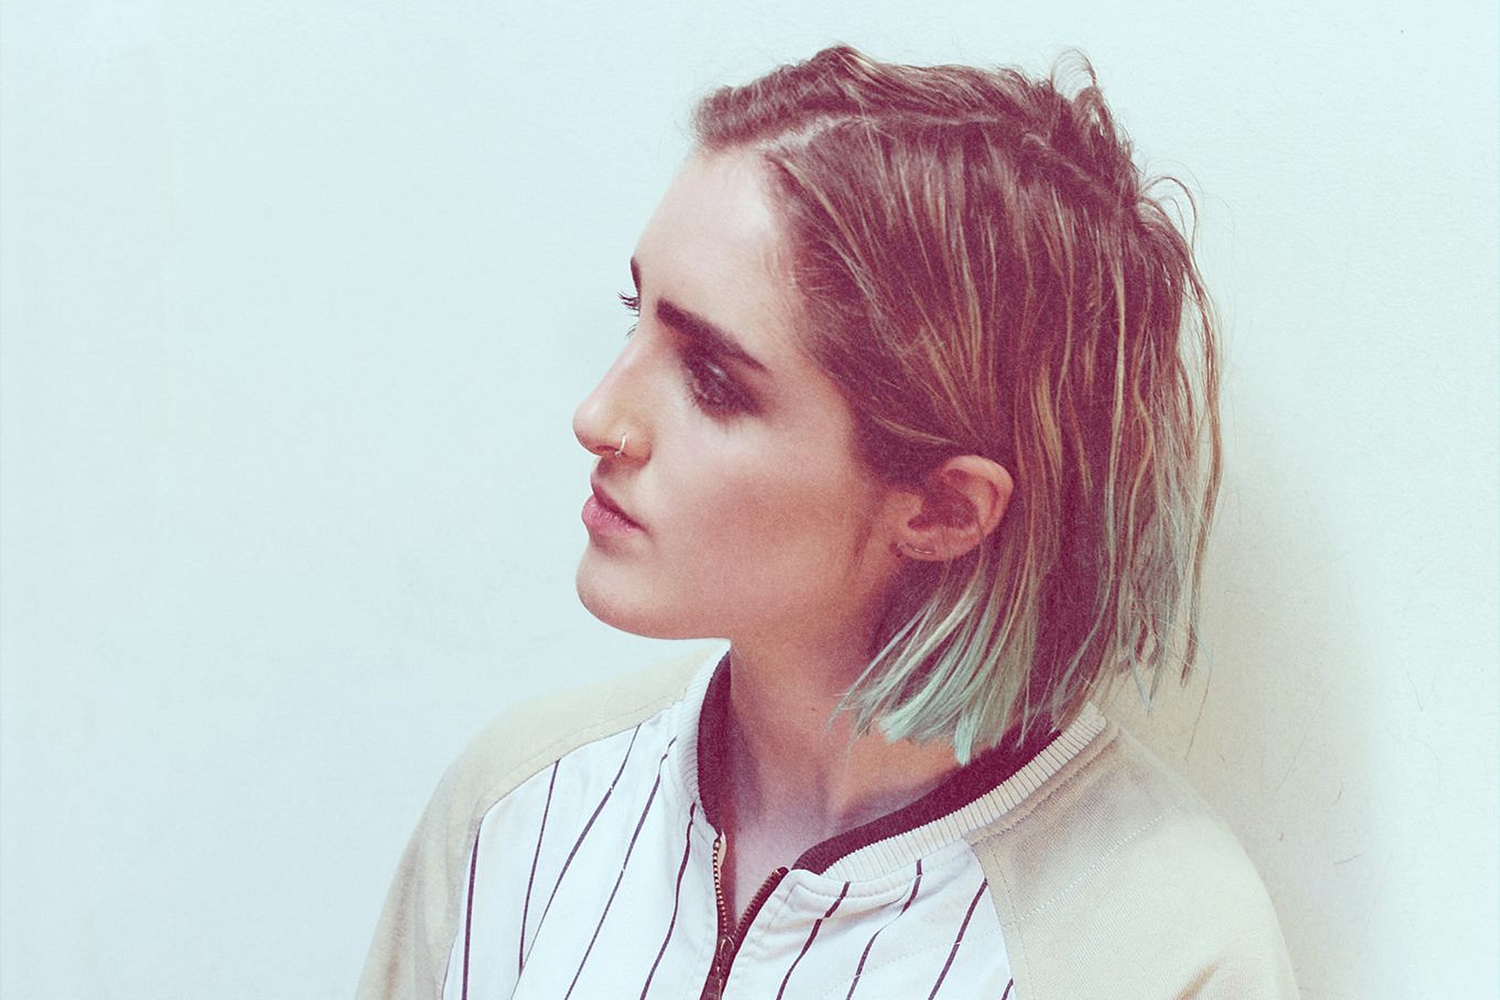 Shura shares new single, ‘Just Once’